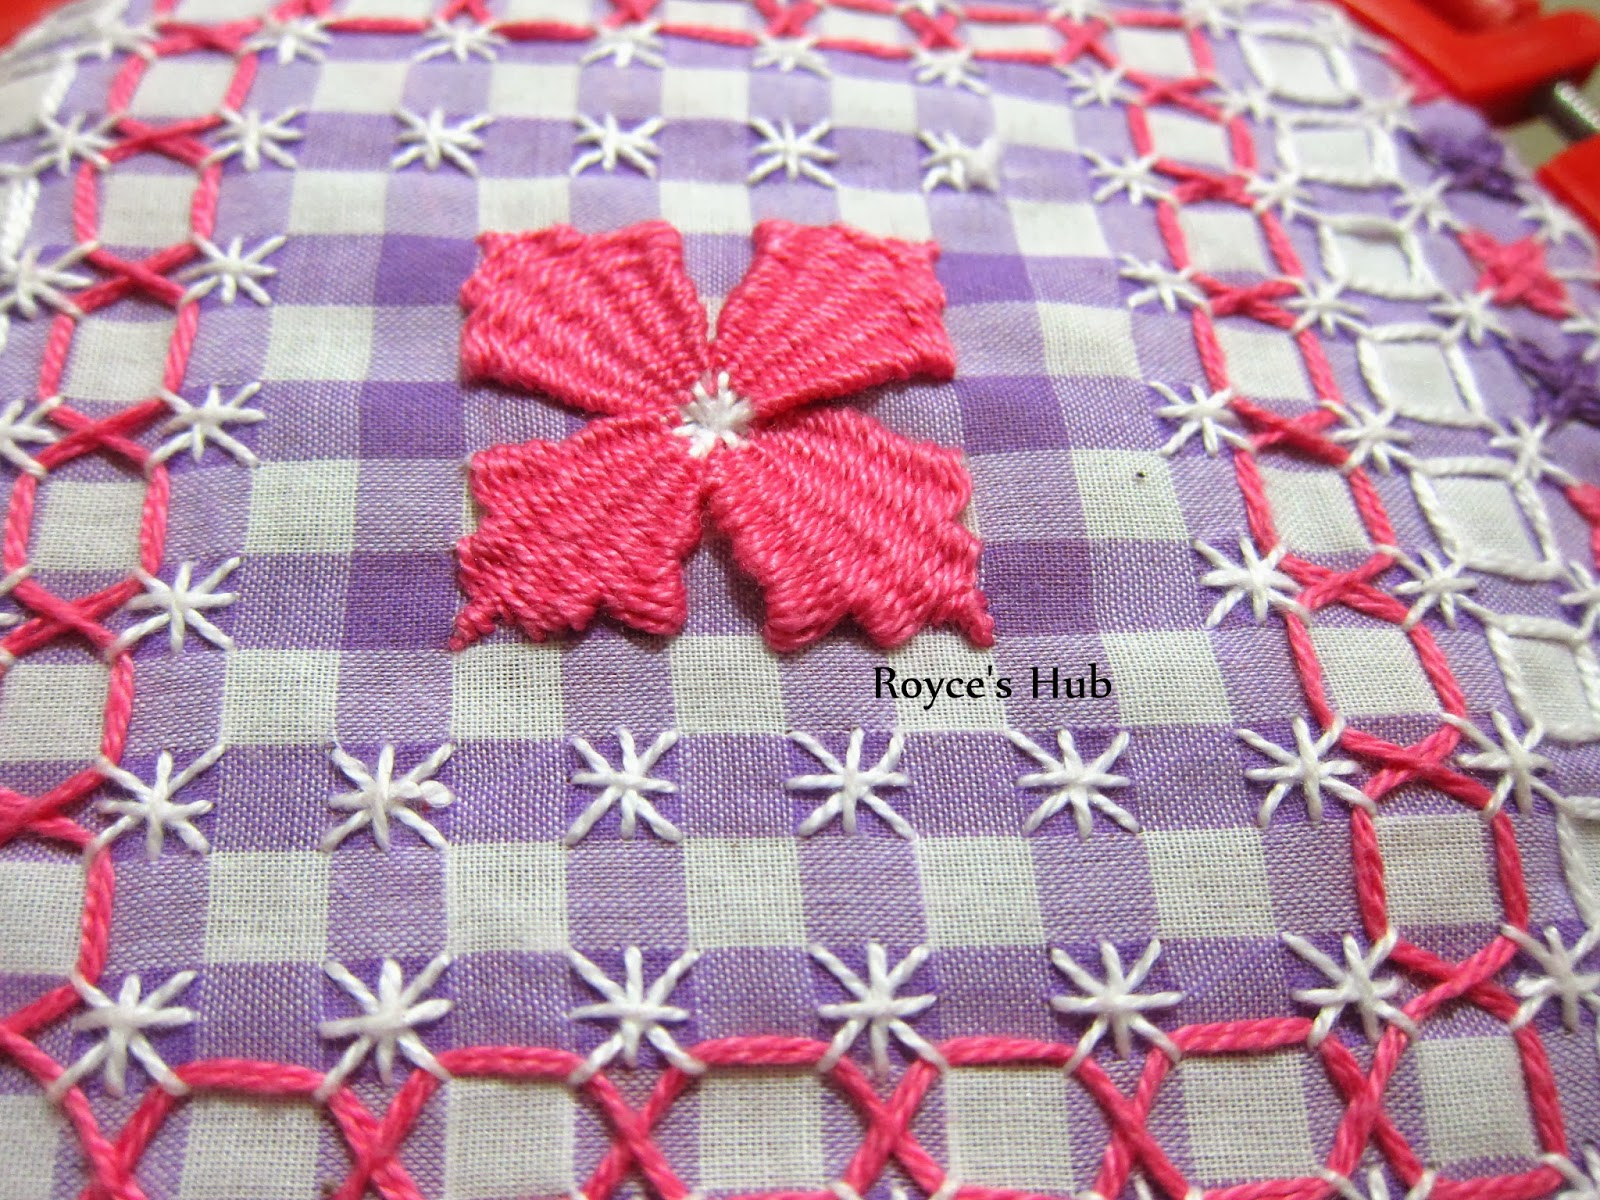 Gingham Embroidery Patterns Free Royces Hub Gingham Embroidery Stitches Needle Weaving